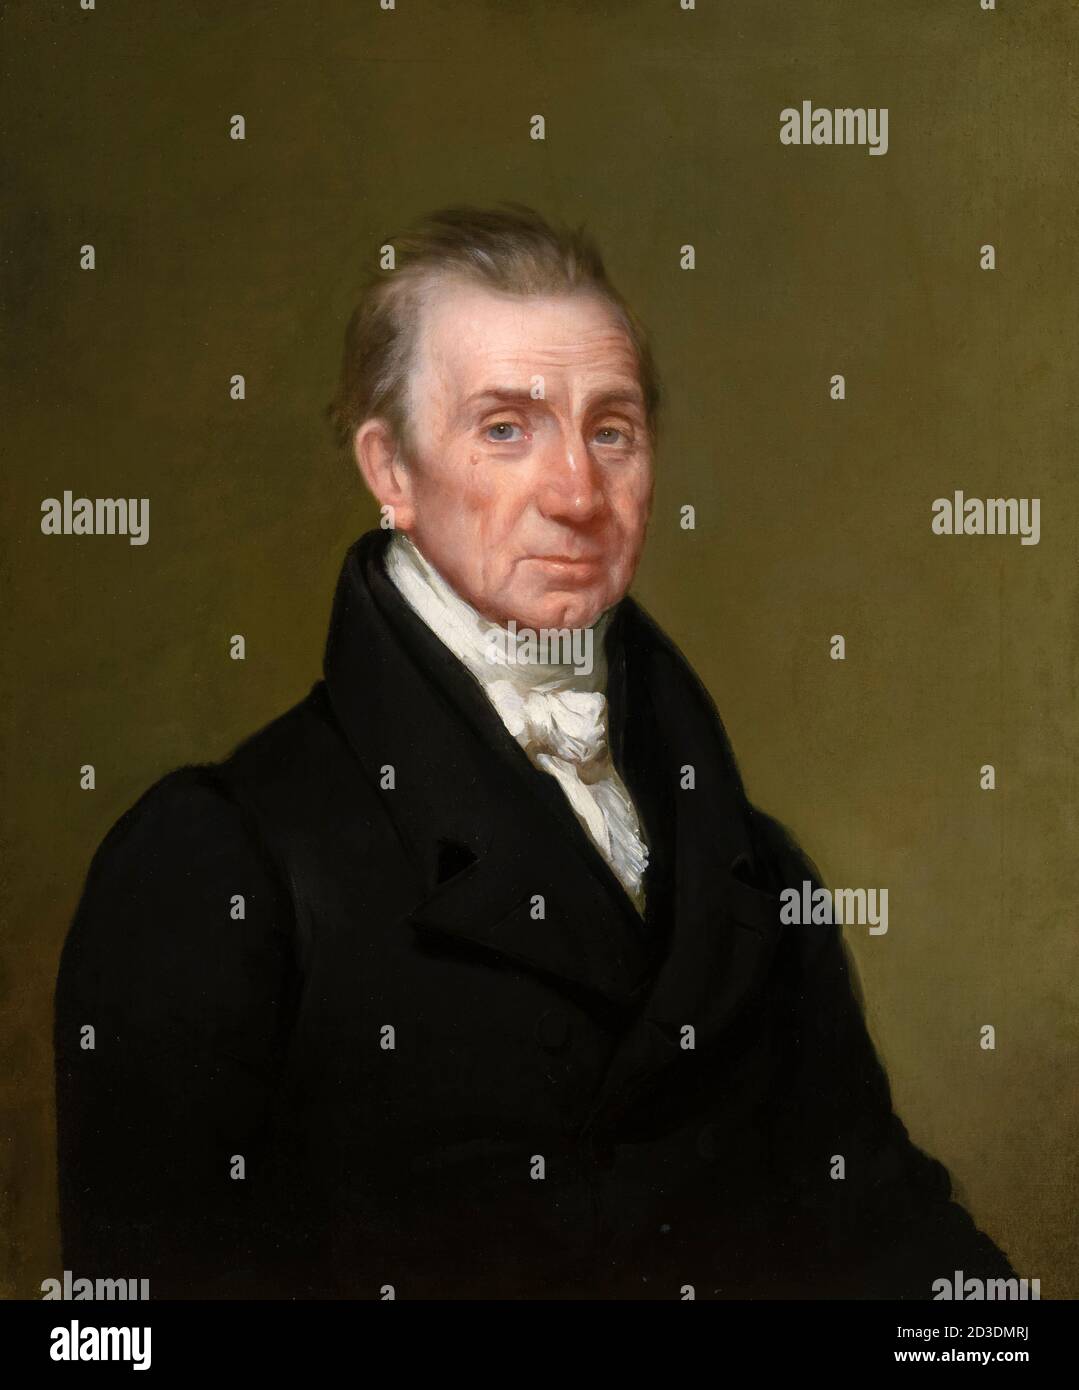 James Monroe (1758-1831), American statesman and Founding Father, 5th President of the United States, portrait painting by Chester Harding, 1829 Stock Photo